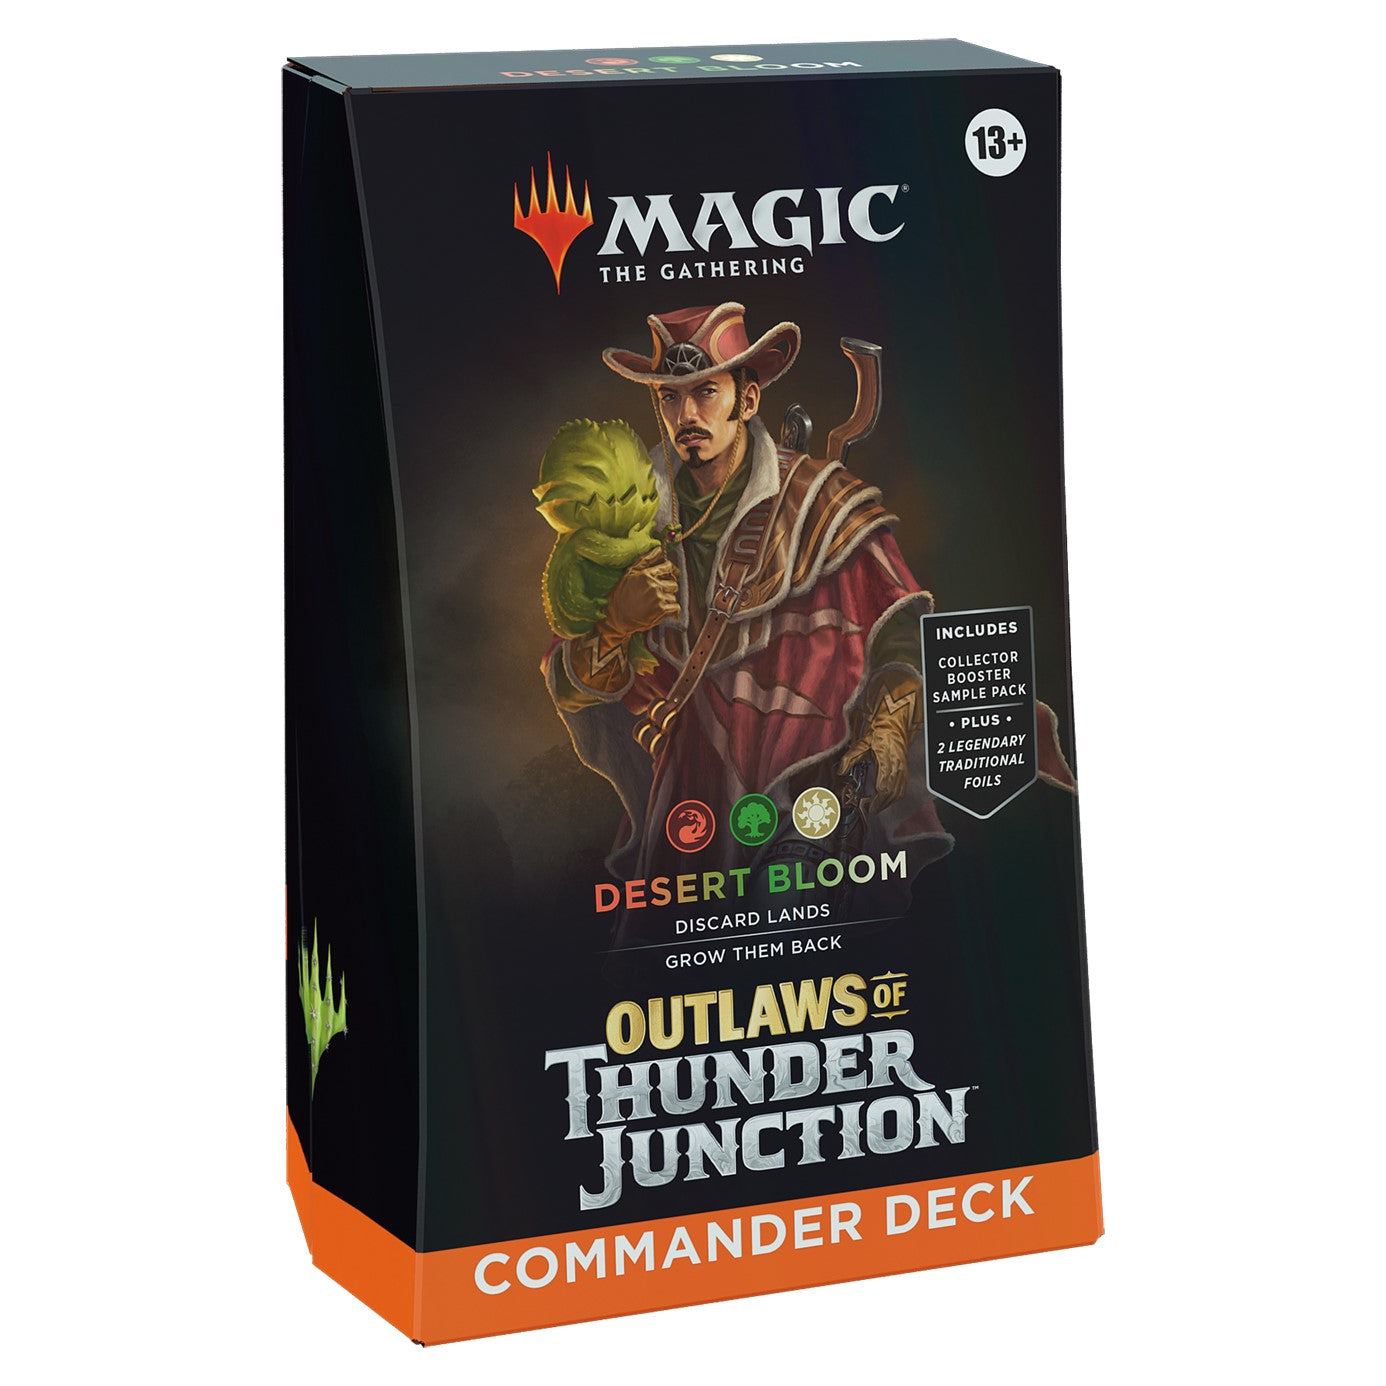 Magic The Gathering - Thunder Junction Commander Deck Set Magic The Gathering Wizards of the Coast   